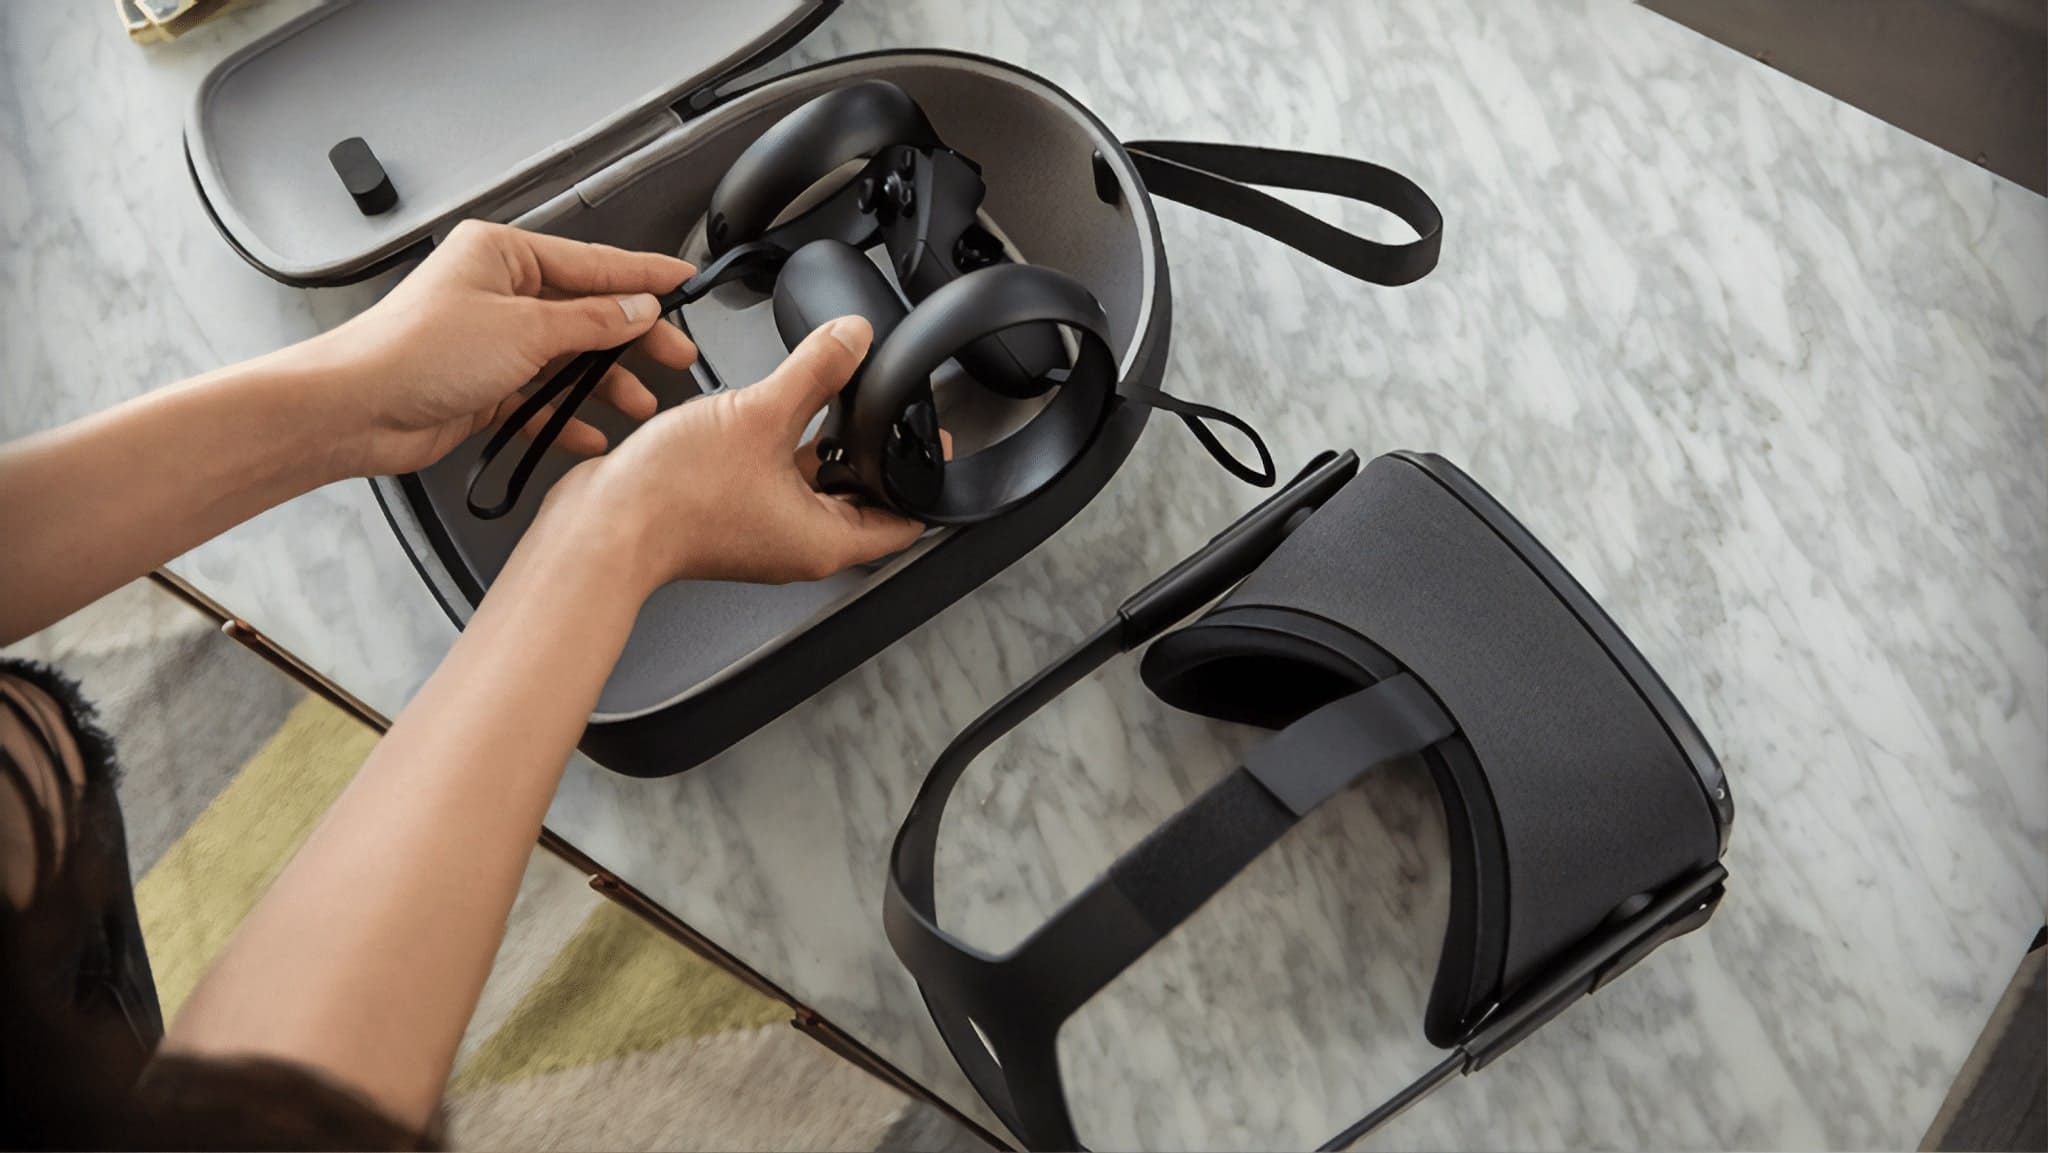 How to optimise and extend the battery life Oculus Quest